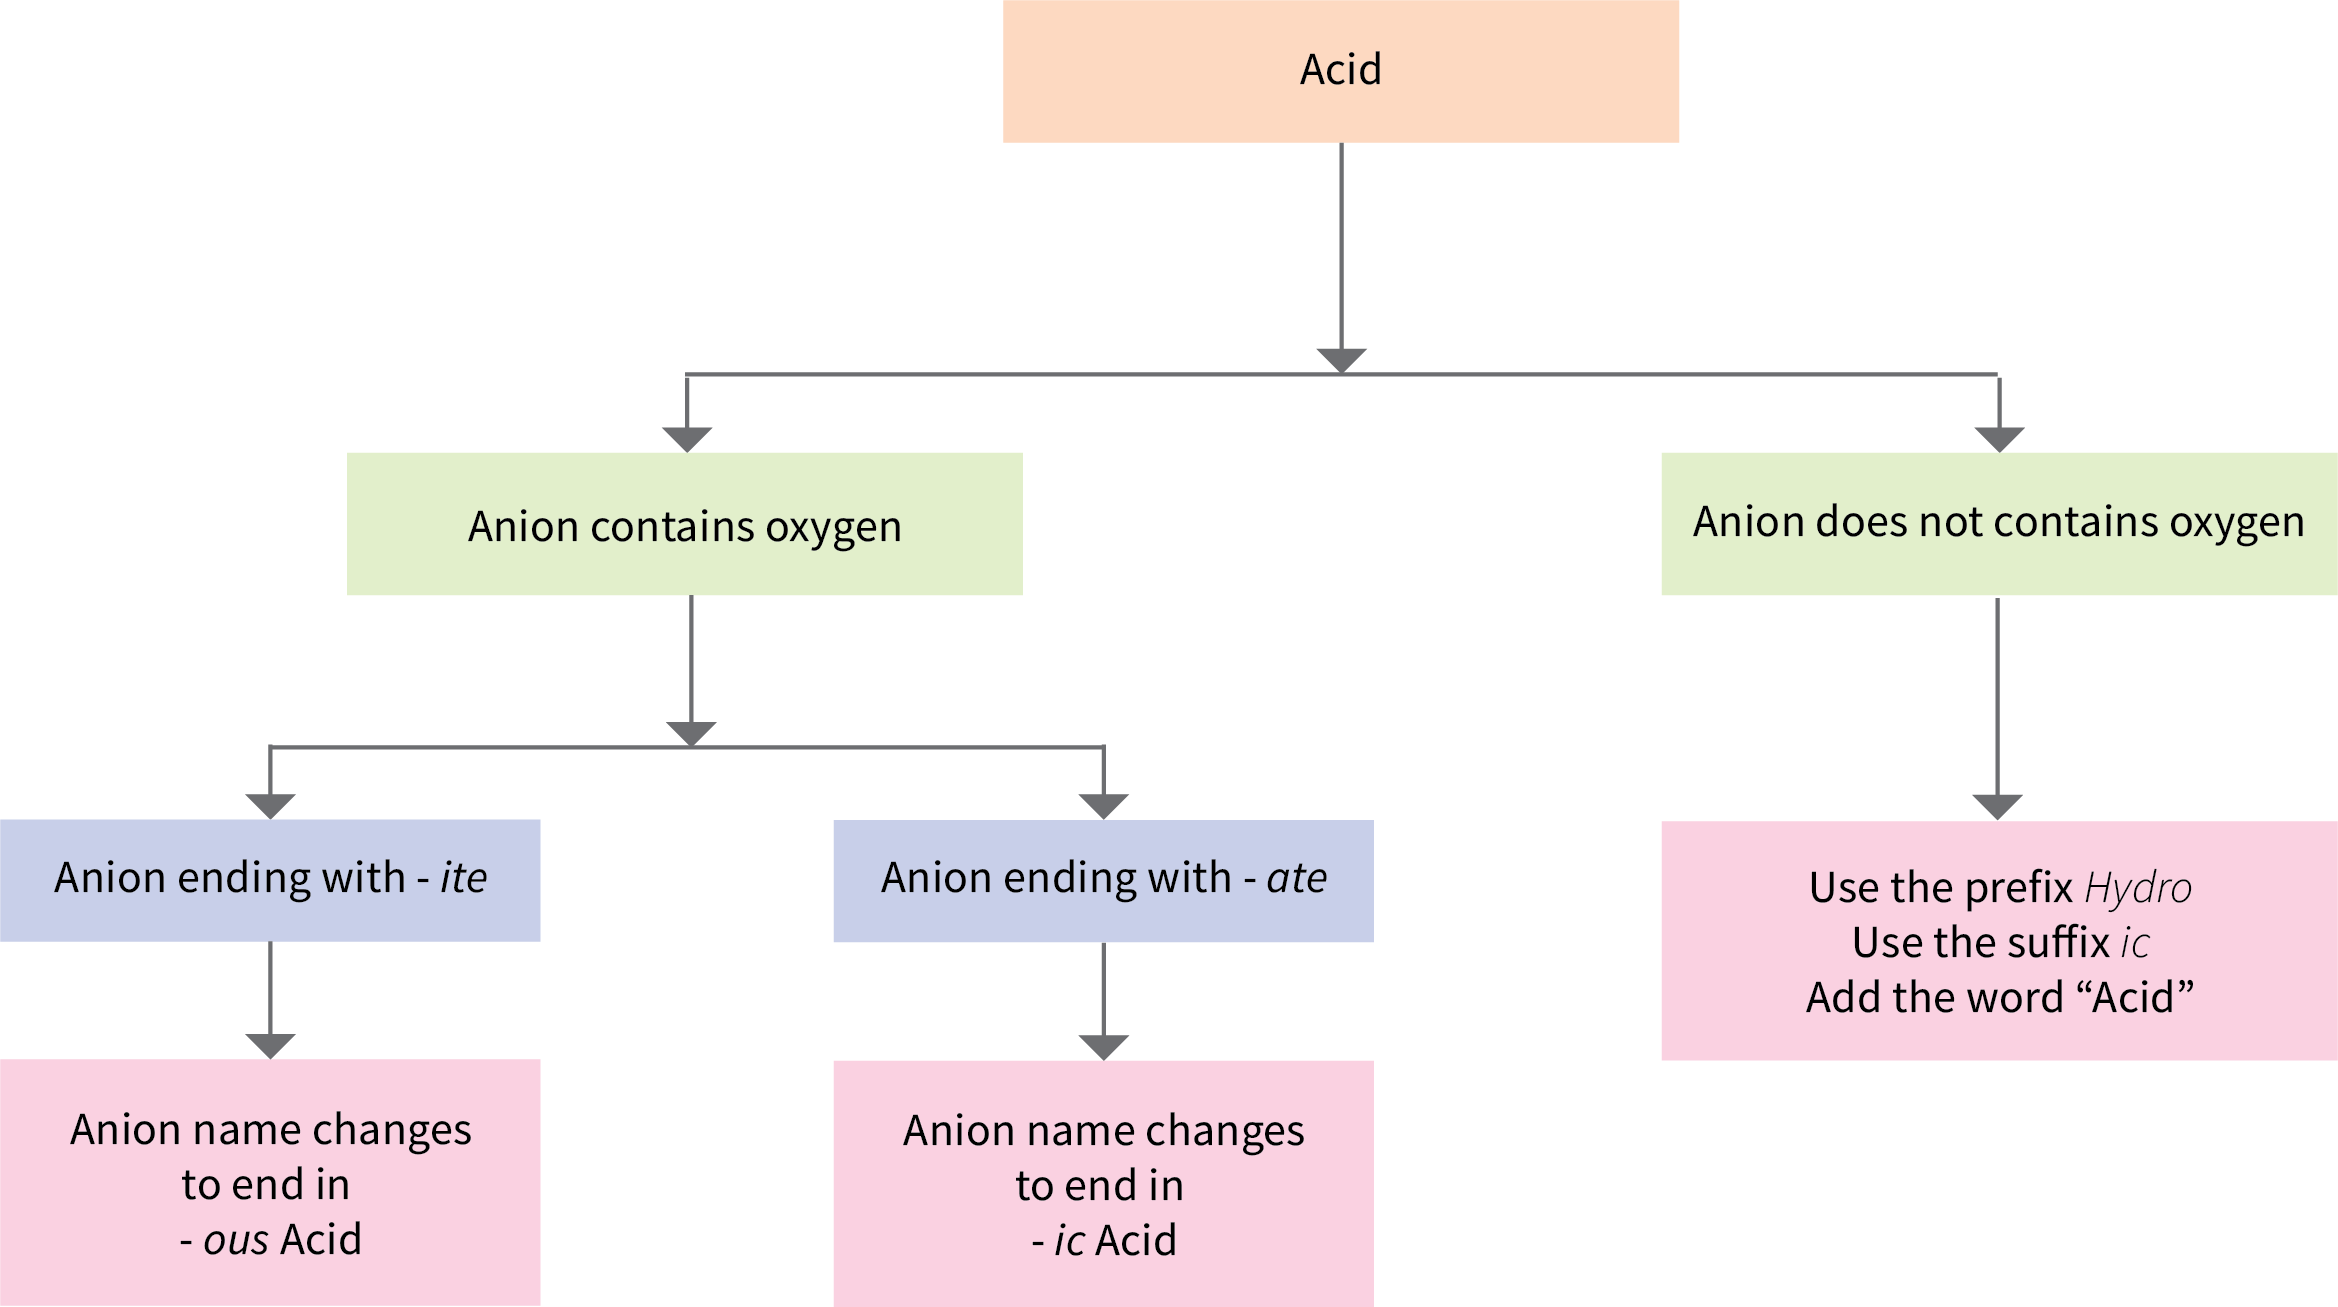 The top heading in flowchart reads “Acid”. If the anion of the acid does not contain oxygen, use the prefix "hydro" and the suffix "ic acid". If the anion of the acid contains oxygen, then determine if the anion name ends in "-ite" or "-ate". If the anion name ends in "-ite", name the anion and change the ending to "-ous acid". If the anion name ends in "-ate", name the anion and change the ending to "-ic acid".